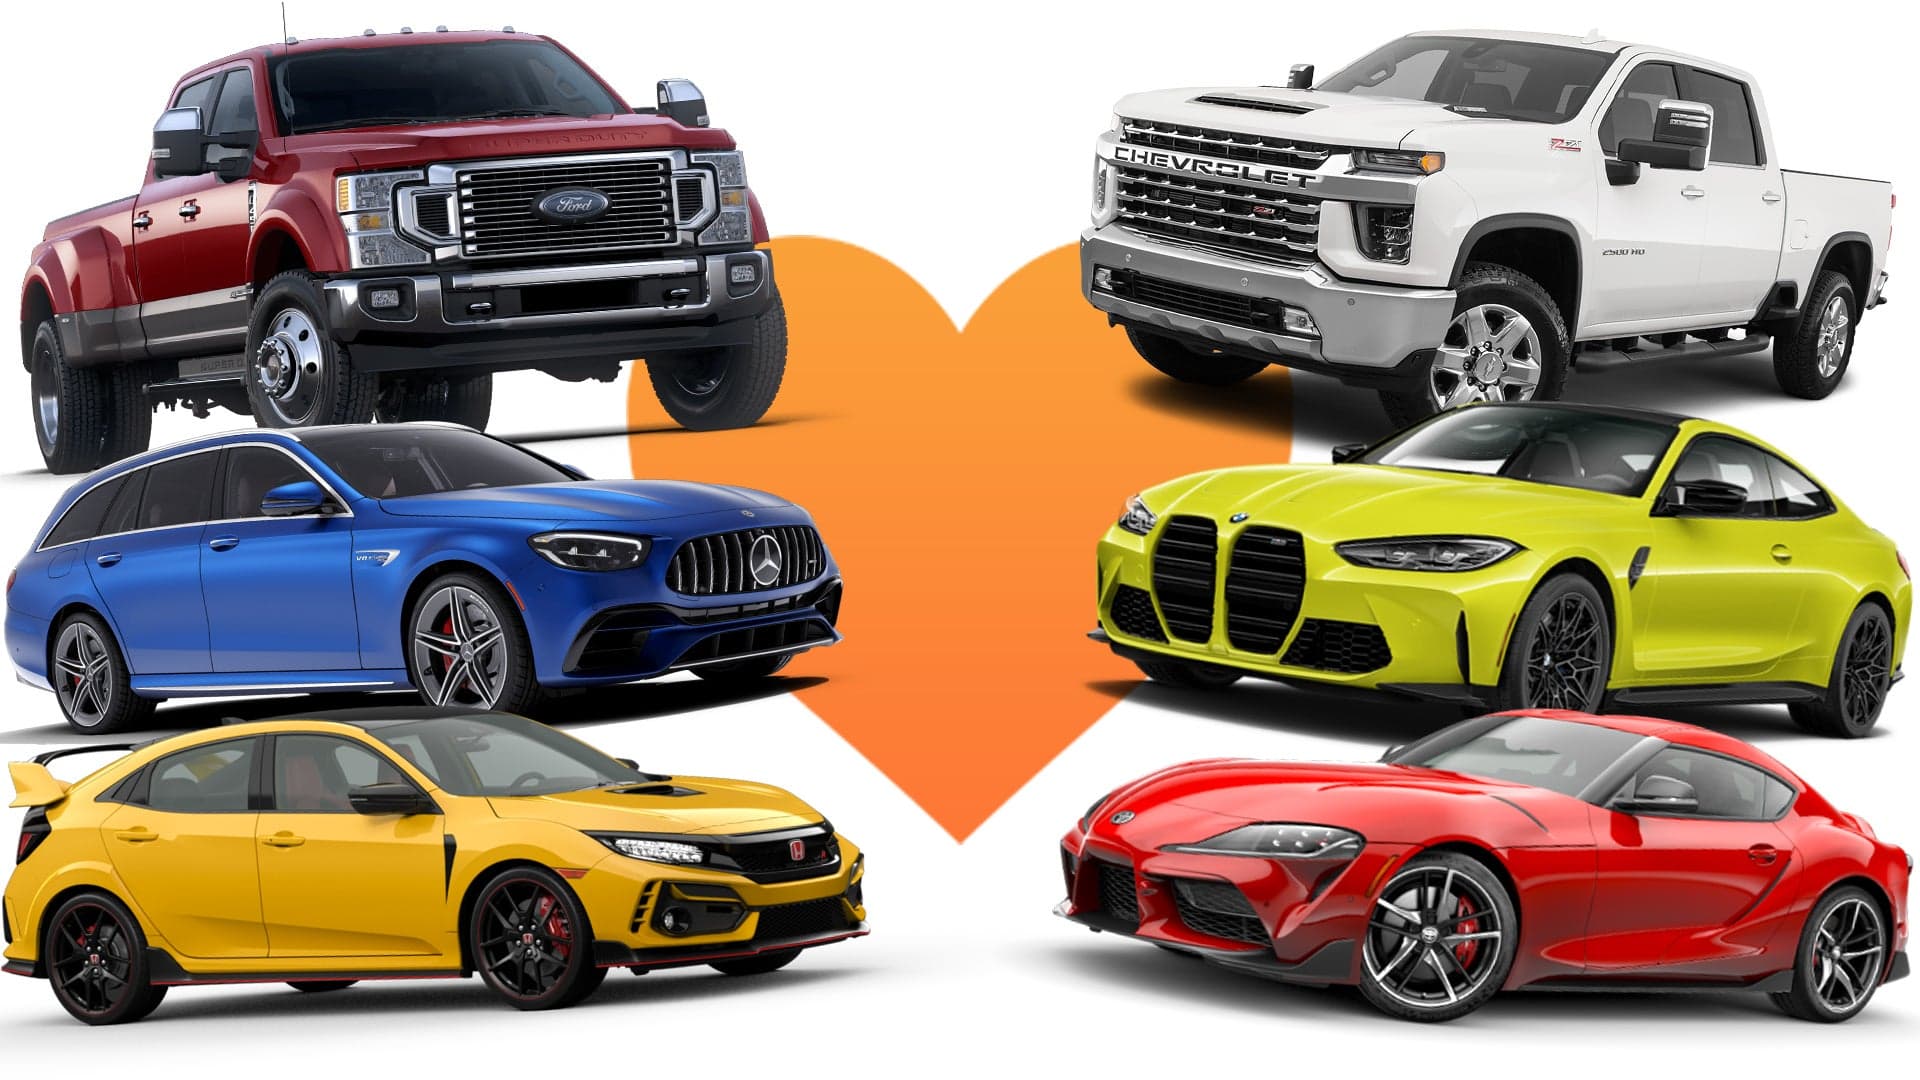 We Asked Automakers to Say Something Nice About Their Rivals. Here’s What Happened